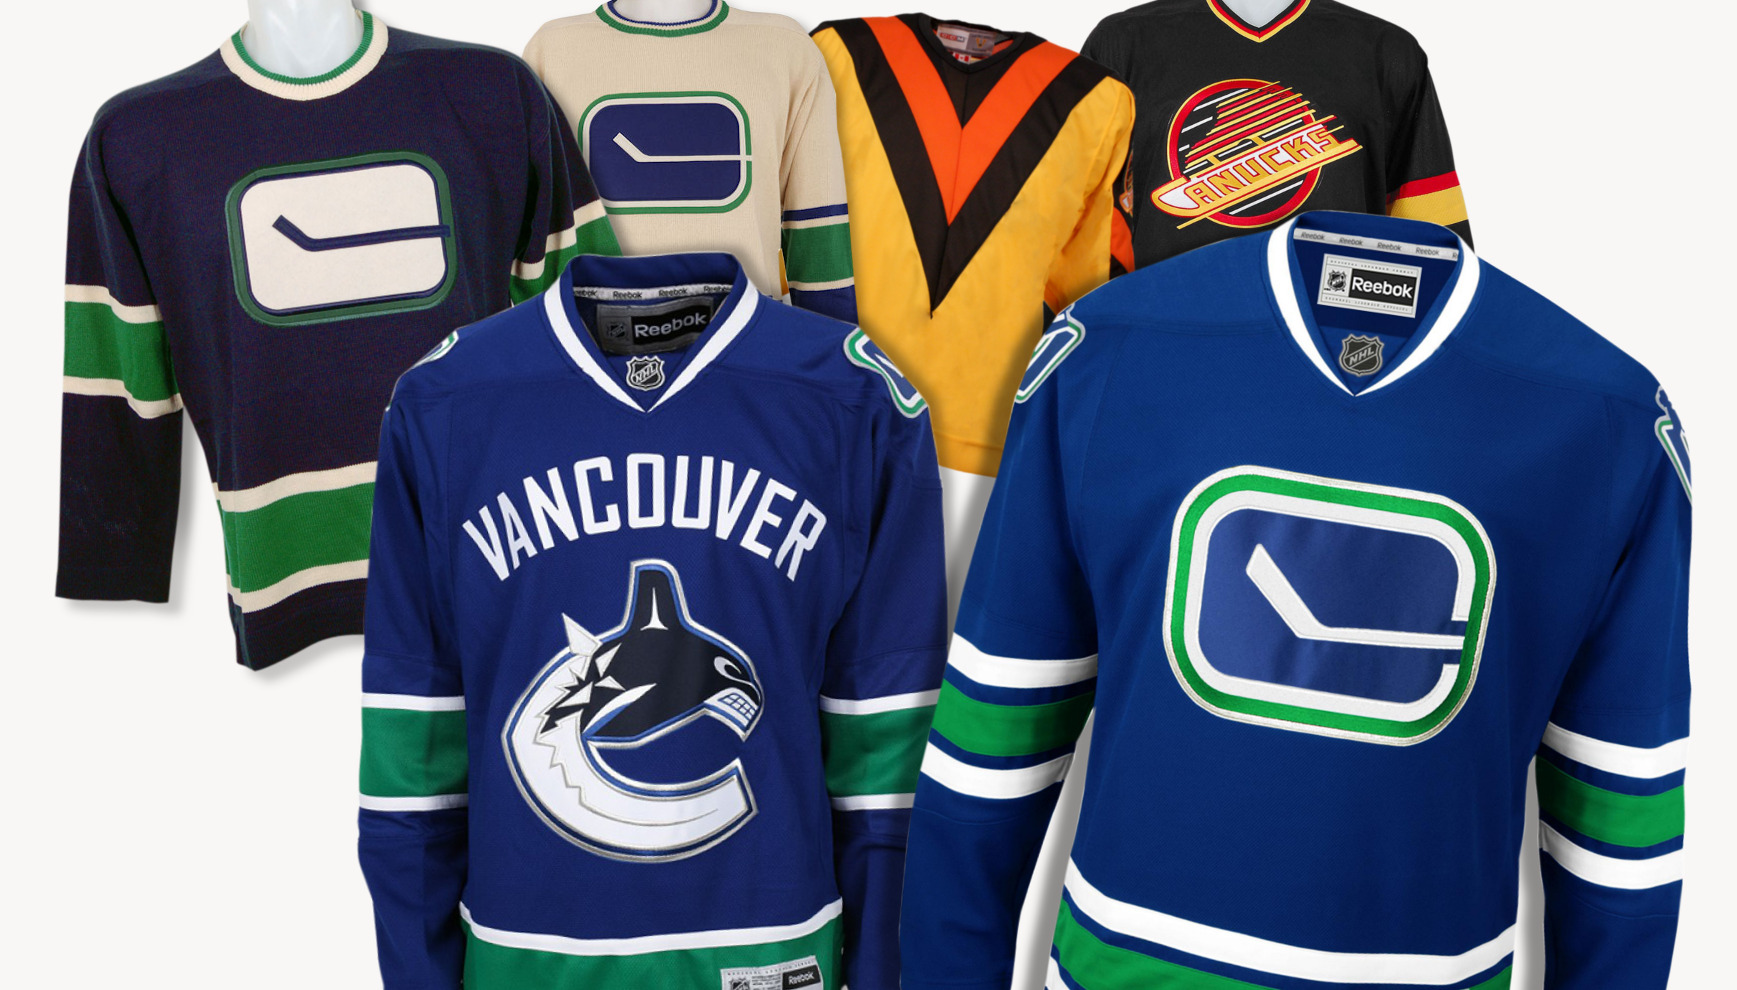 Bruins, Canucks jerseys have different look